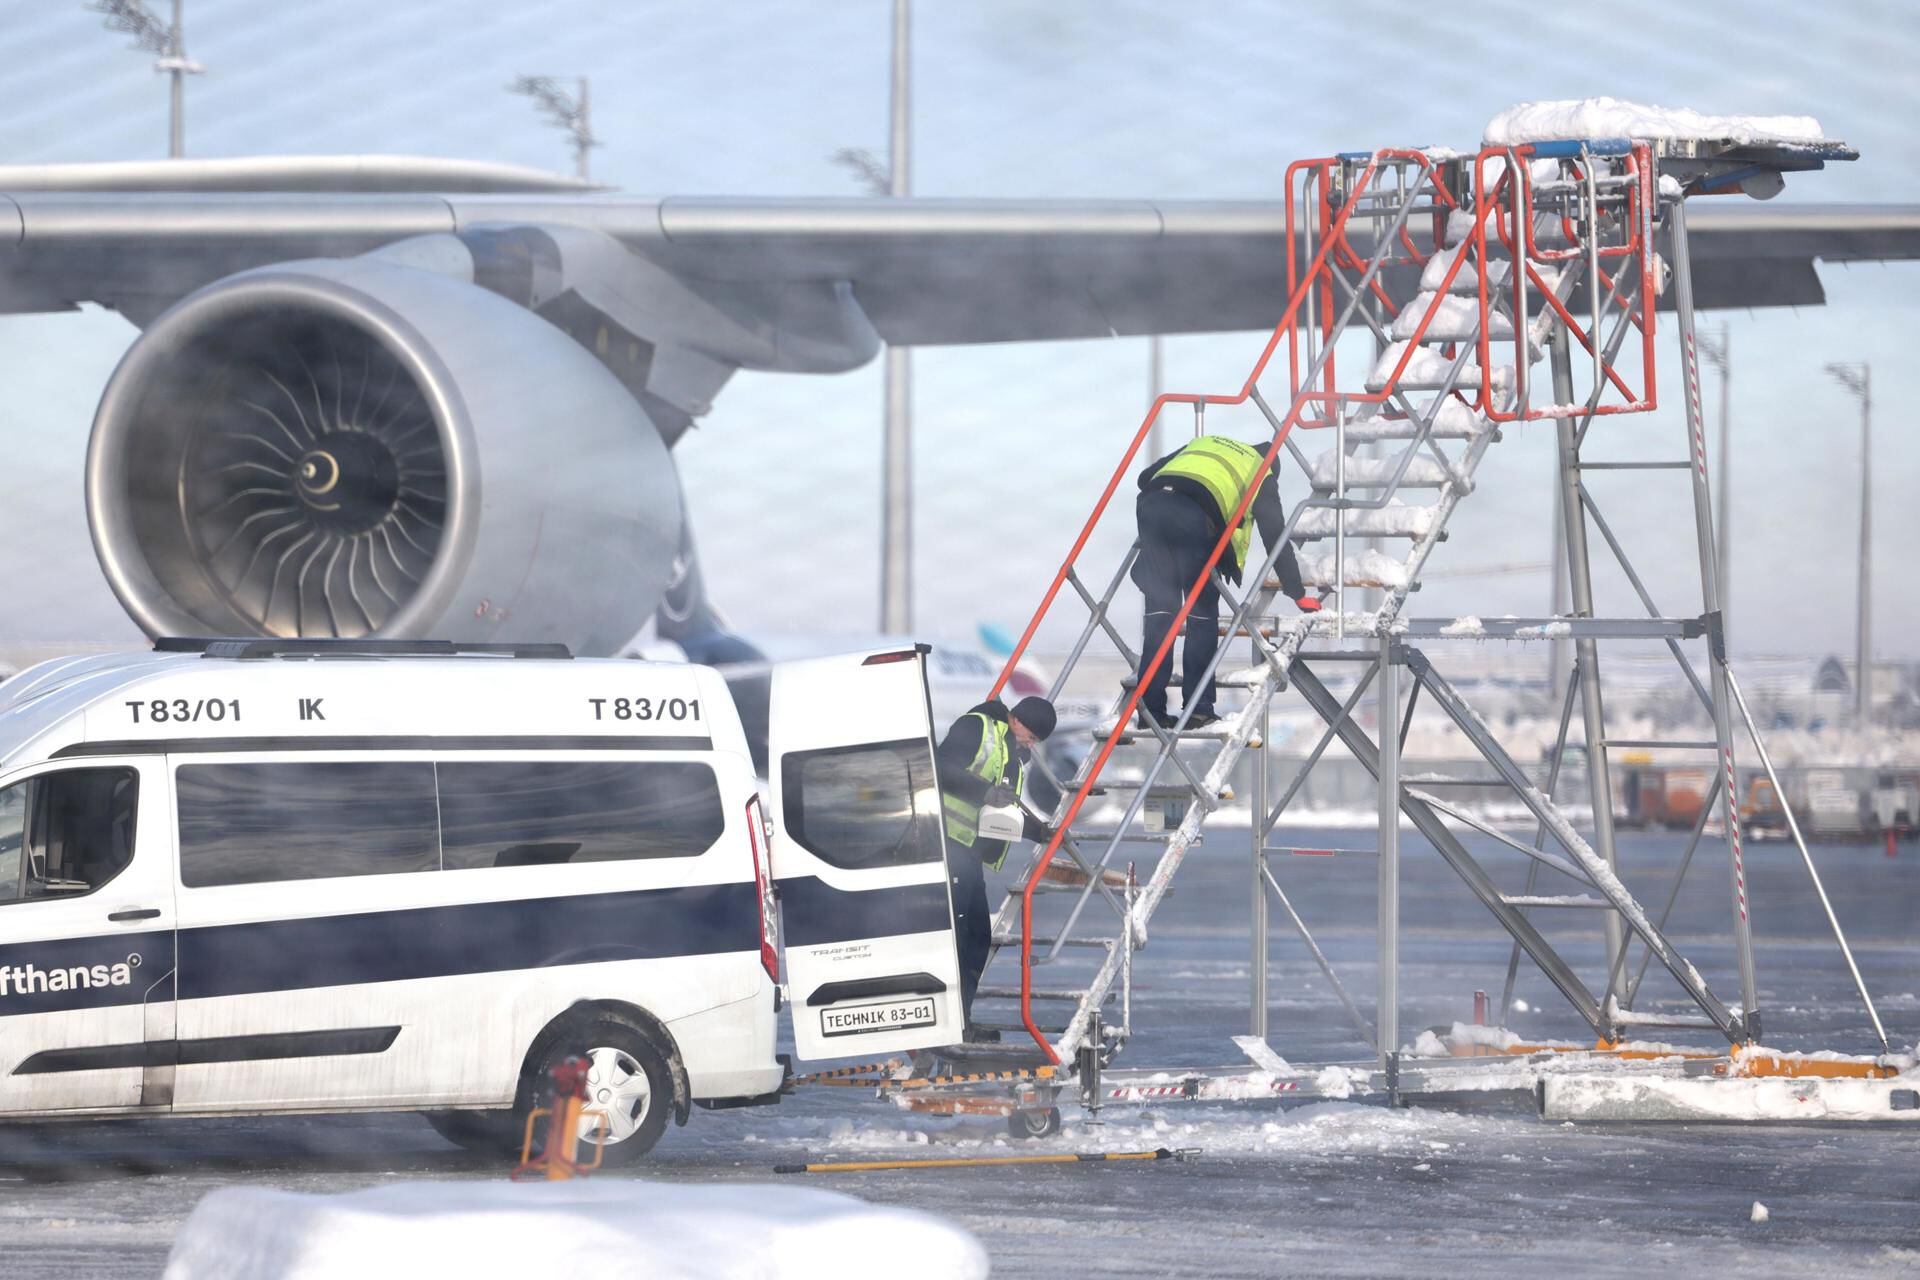 Munich (Germany), 05/12/2023.- Workers remove snow from airplane stairs next to a parked Lufthansa plane at the airport in Munich, Germany, 05 December 2023. Due to overnight freezing rain conditions making 'safe flight operations impossible' in the morning at Munich Airport, there will be no take-offs and landings on 05 December until 12 noon local time, the airport announced on its website. The statement added that during the rest of the day the majority of the flights were likely to be canceled over 'safety reasons'. Flight operations at Munich Airport had been temporarily suspended over the weekend due to heavy snowfall. (Alemania) EFE/EPA/ANNA SZILAGYI
